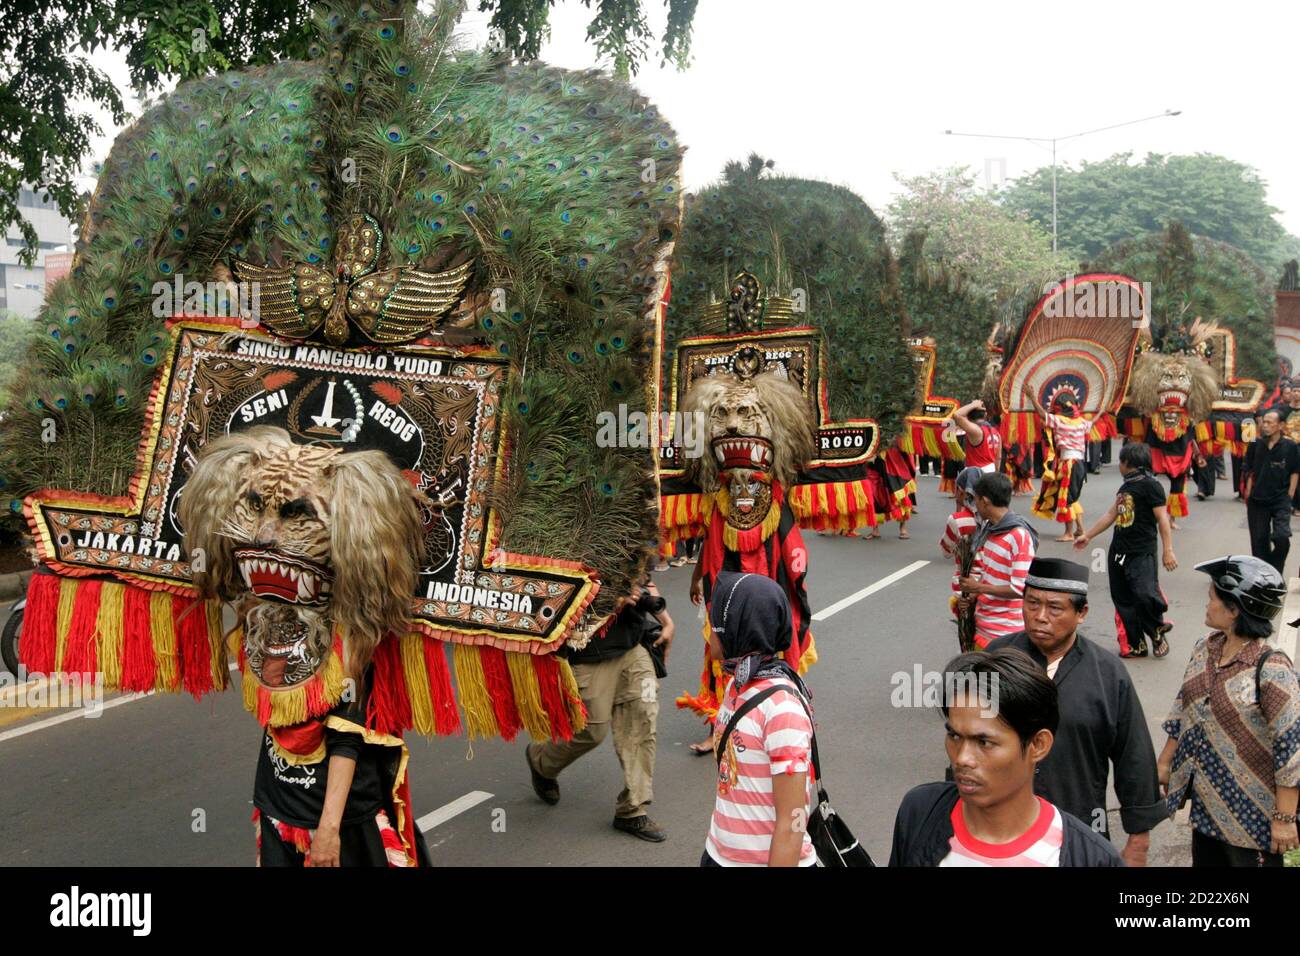 Reog Ponorogo dancers march through the streets in Jakarta November 29, 2007. Hundreds of Indonesian Reog Ponogogo dancers held a colourful protest outside the Malaysian Embassy as a new dispute erupted between the two neighbours over cultural heritage. REUTERS/Dadang Tri  (INDONESIA) Foto de stock